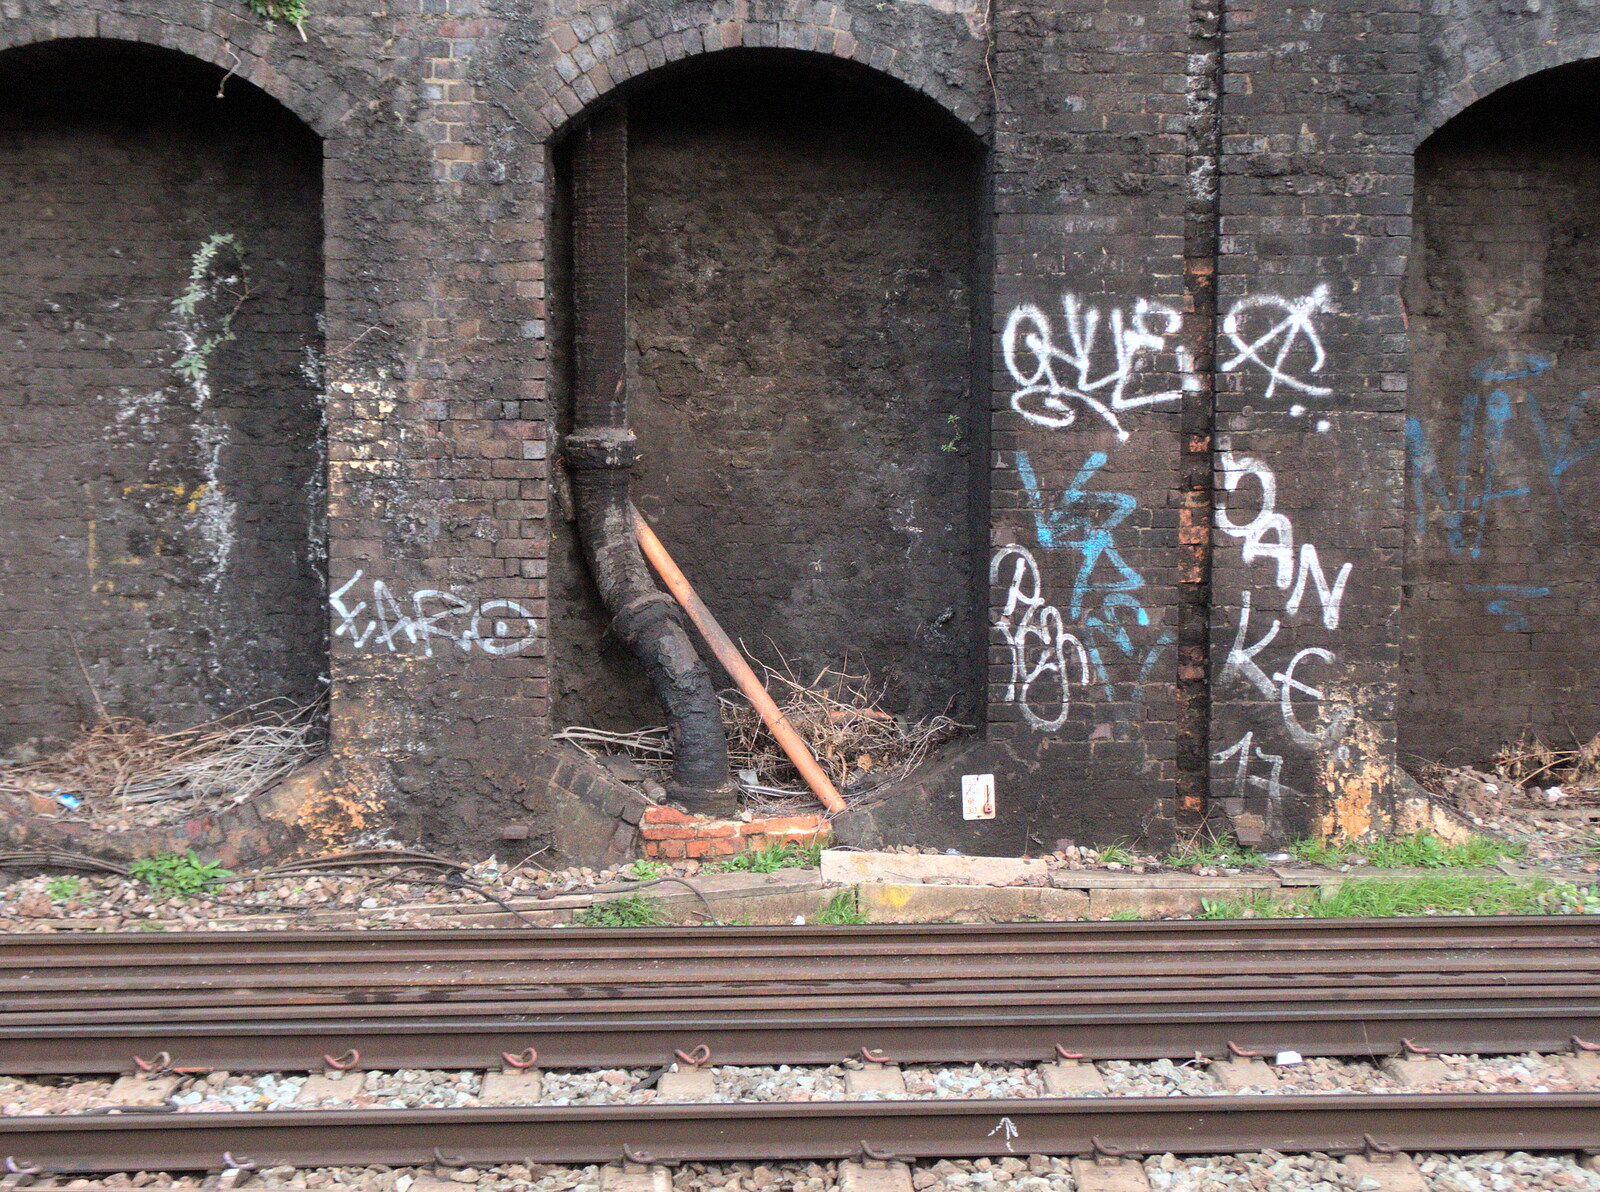 A pipe comes and goes through a brick arch from Railway Graffiti, Tower Hamlets, London - 12th February 2019